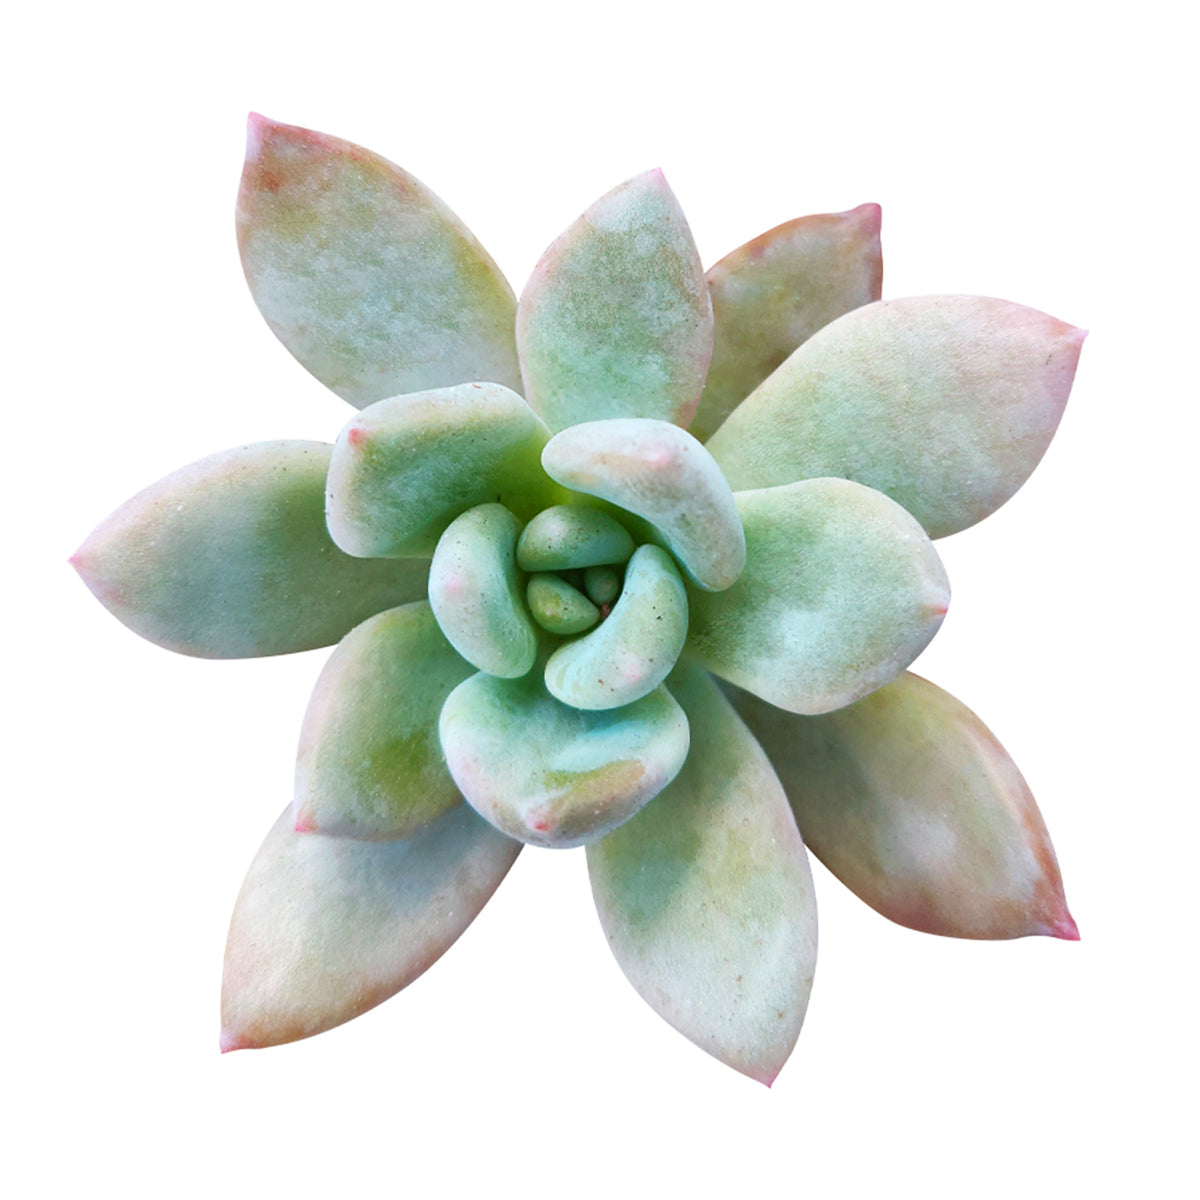 How to care for Graptoveria Opalina Succulent, How to make your succulent purple, How to change succulent color, How to make Graptoveria Opalina turn purple, Succulent turning purple, How to make succulents change color, How to grow colorful succulents, rare succulents, rare succulents for sale, unique succulents, buy succulents online, rare succulent, succulent shop, unusual succulents, succulent store, succulents online